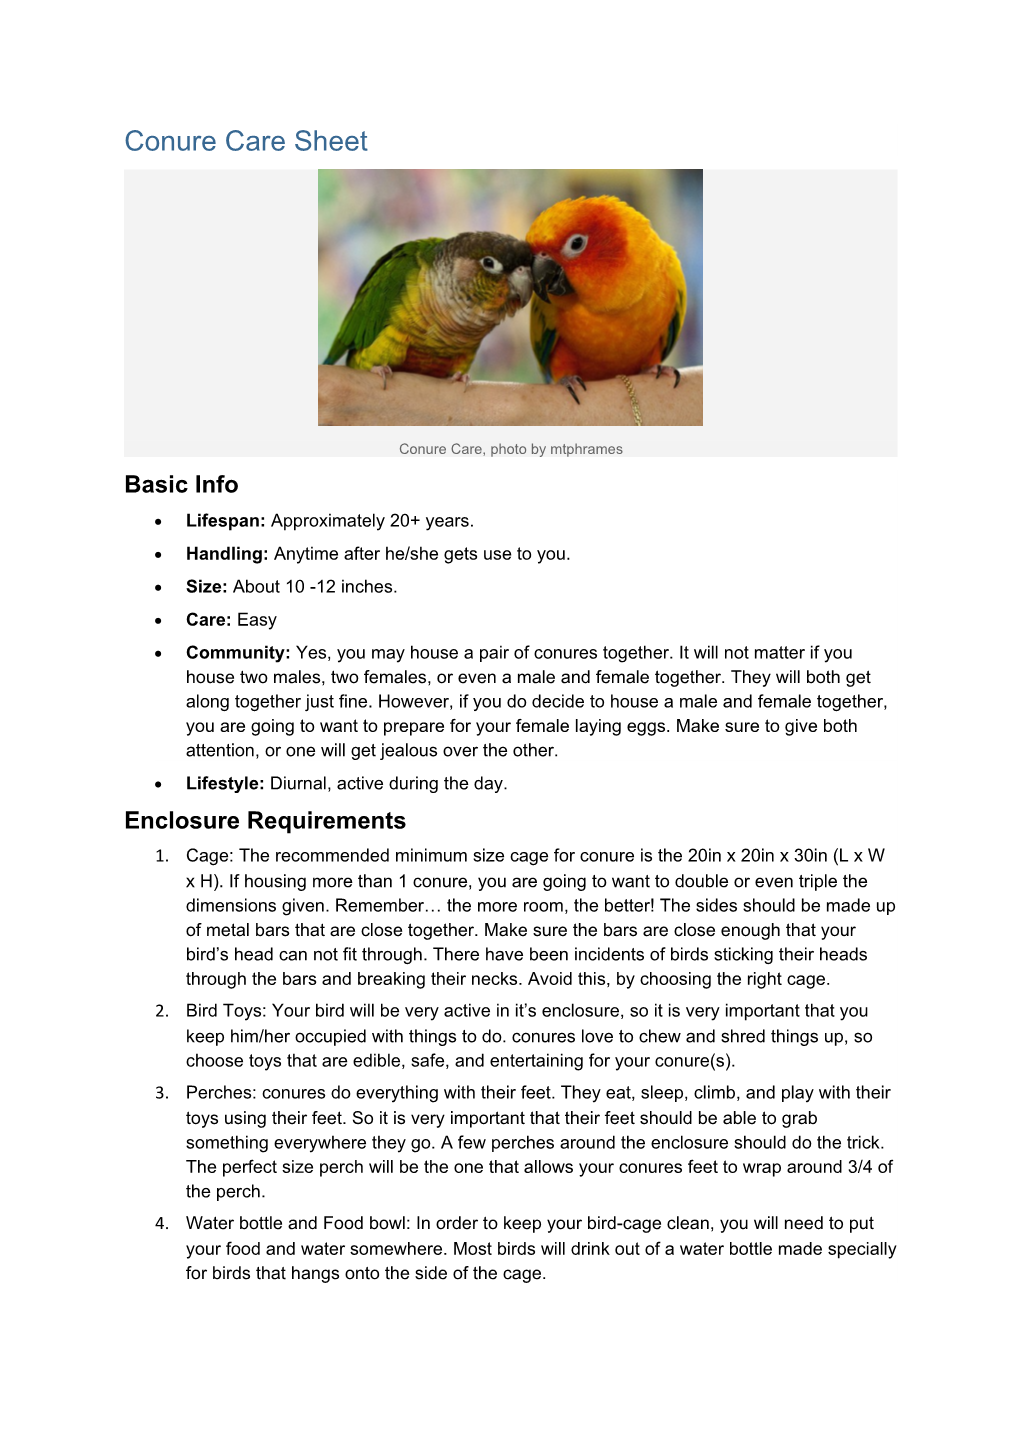 Conure Care, Photo by Mtphrames